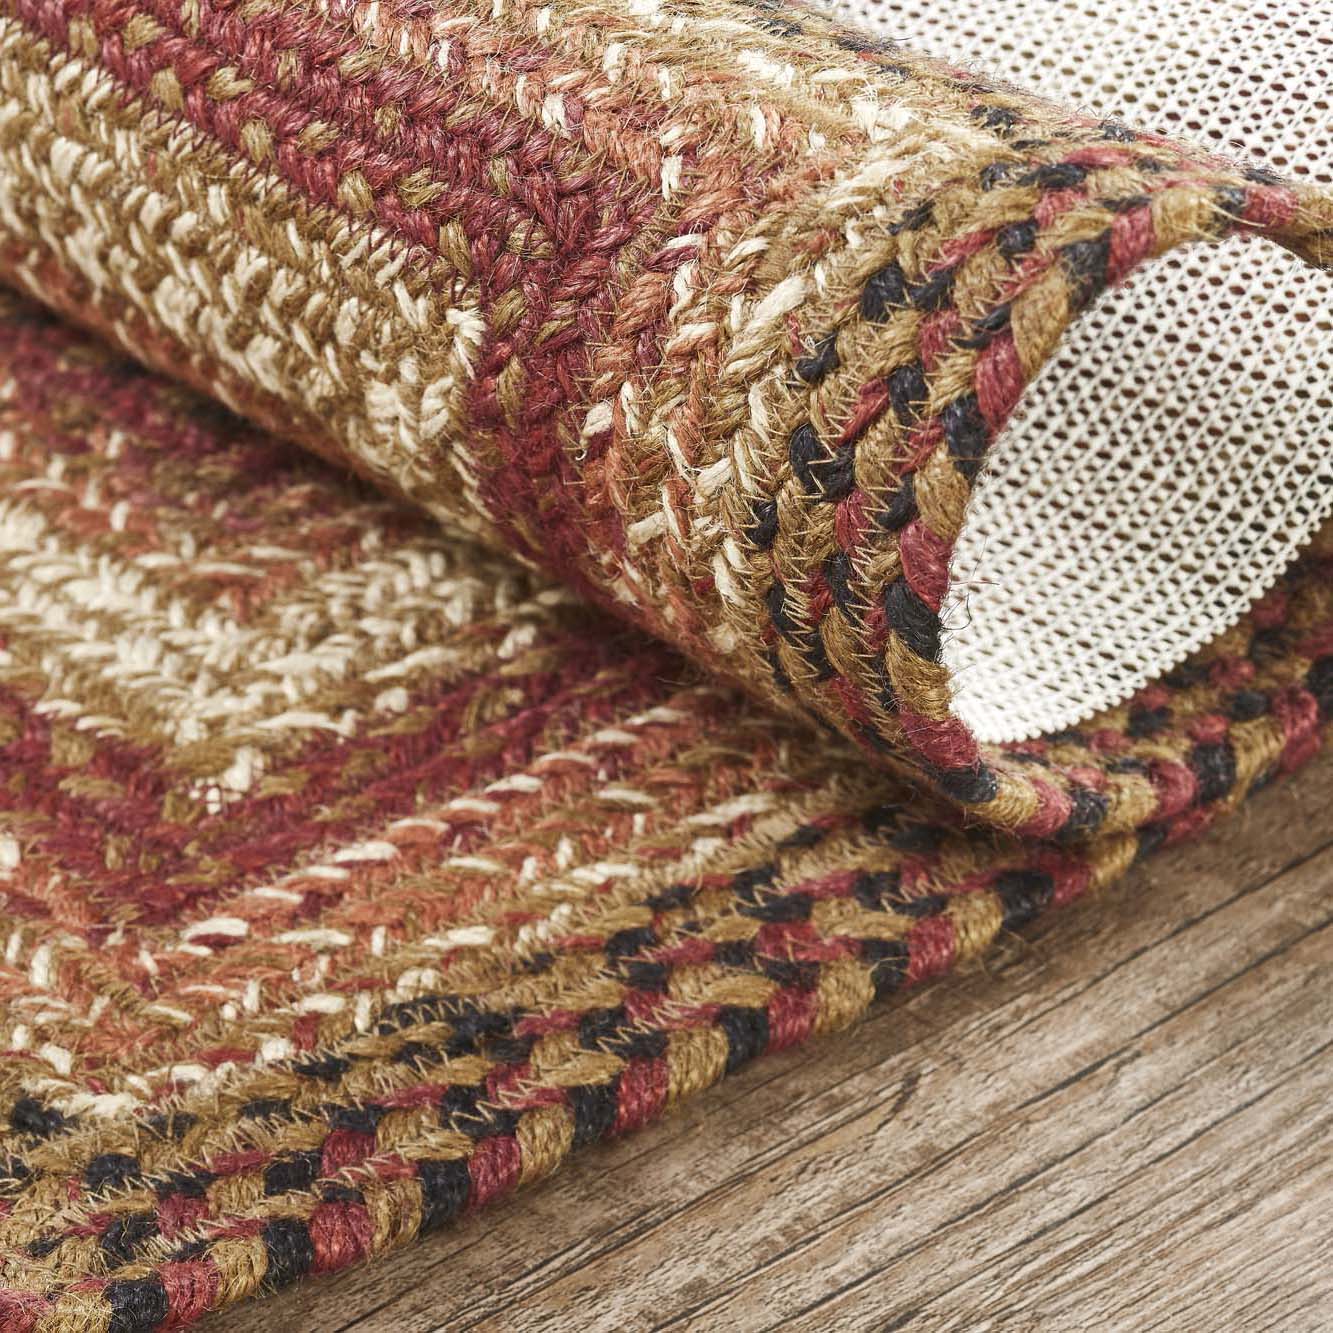 Ginger Spice Jute Rug Rect w/ Pad 27x48